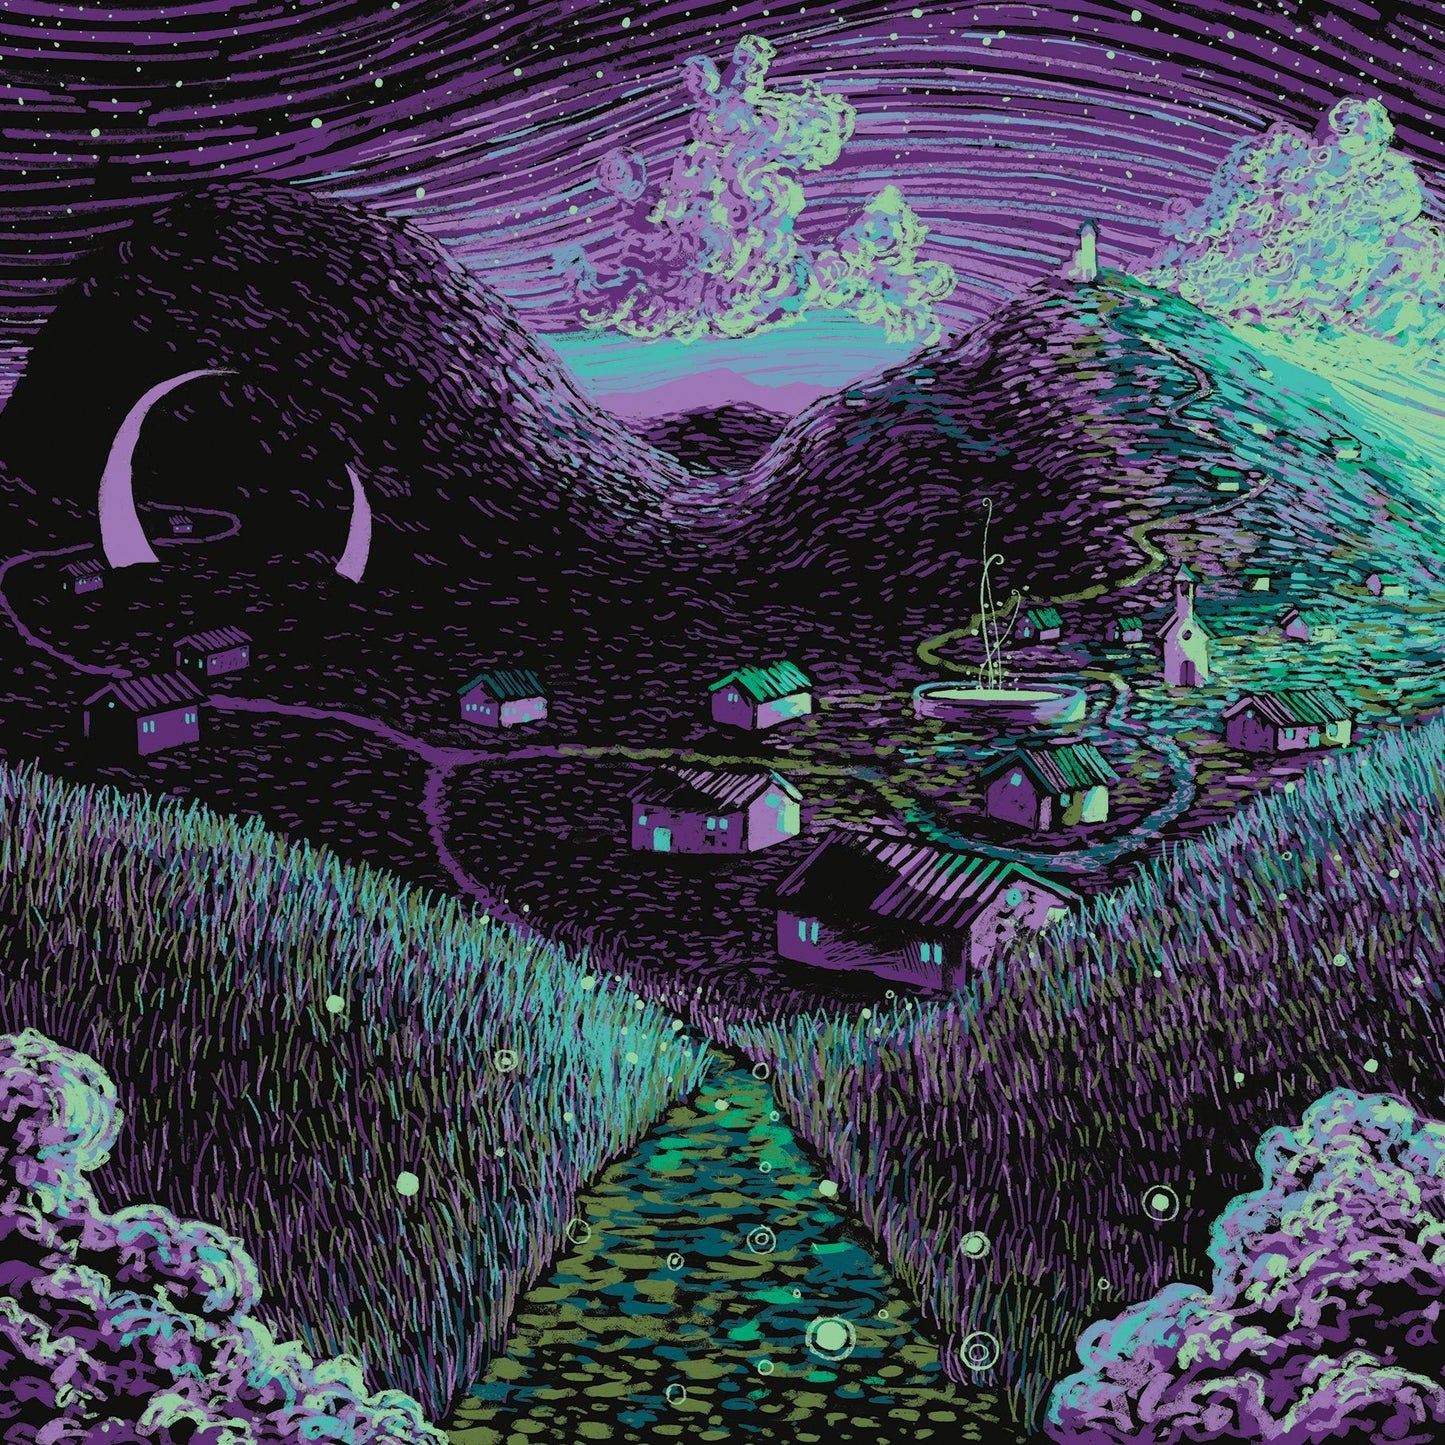 Early Days (Lavender Moon Edition of 40) Print James R. Eads